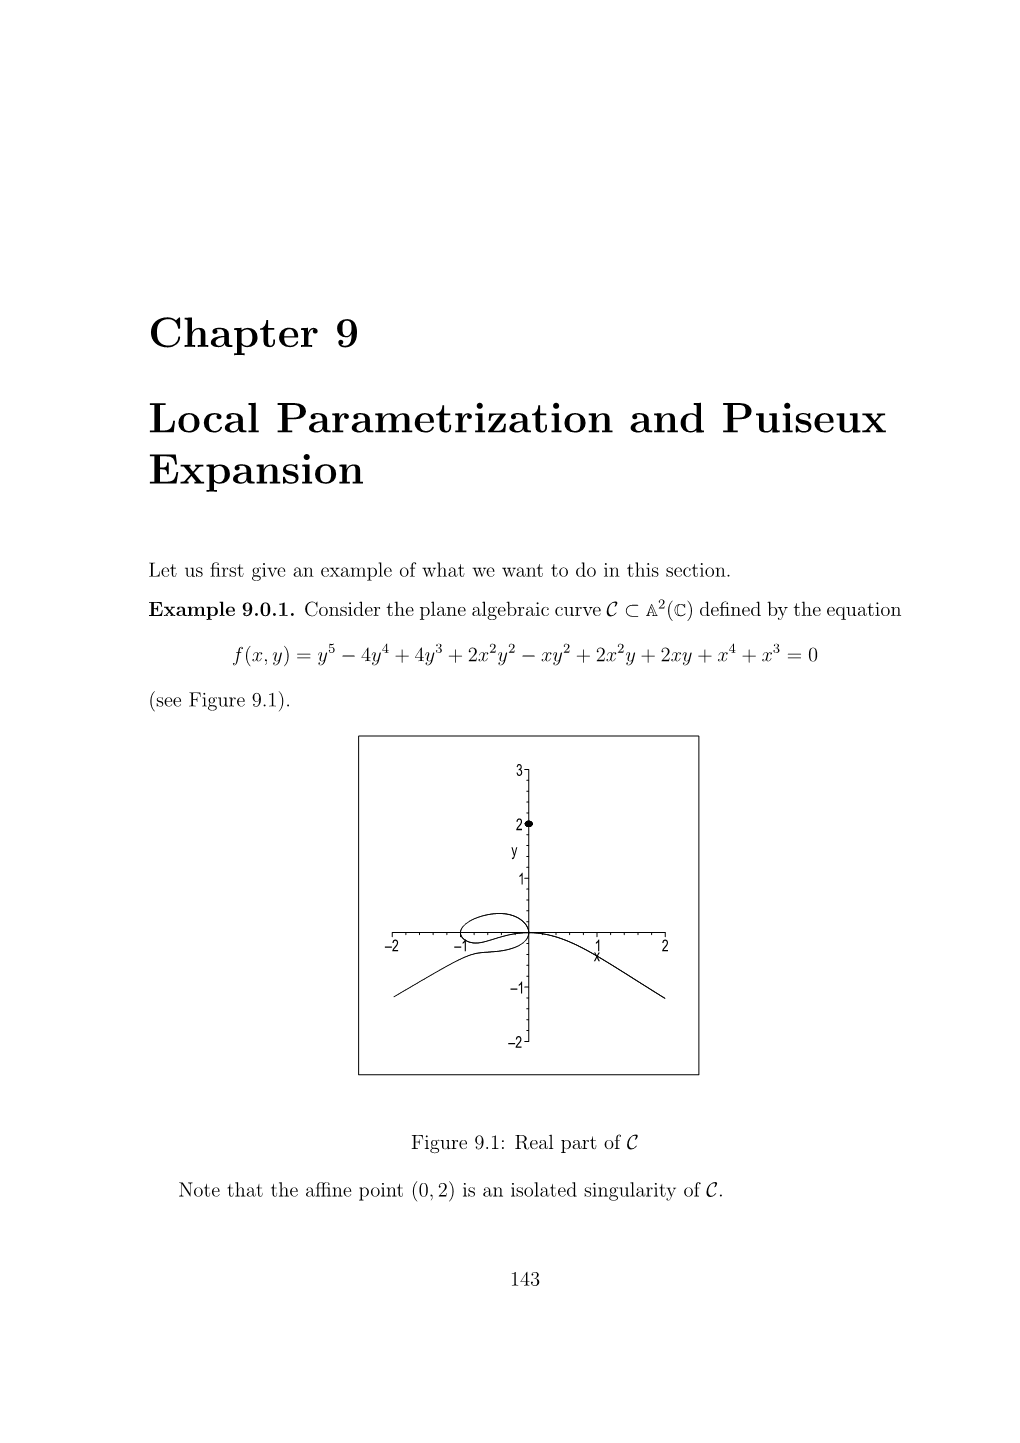 Chapter 9 Local Parametrization and Puiseux Expansion